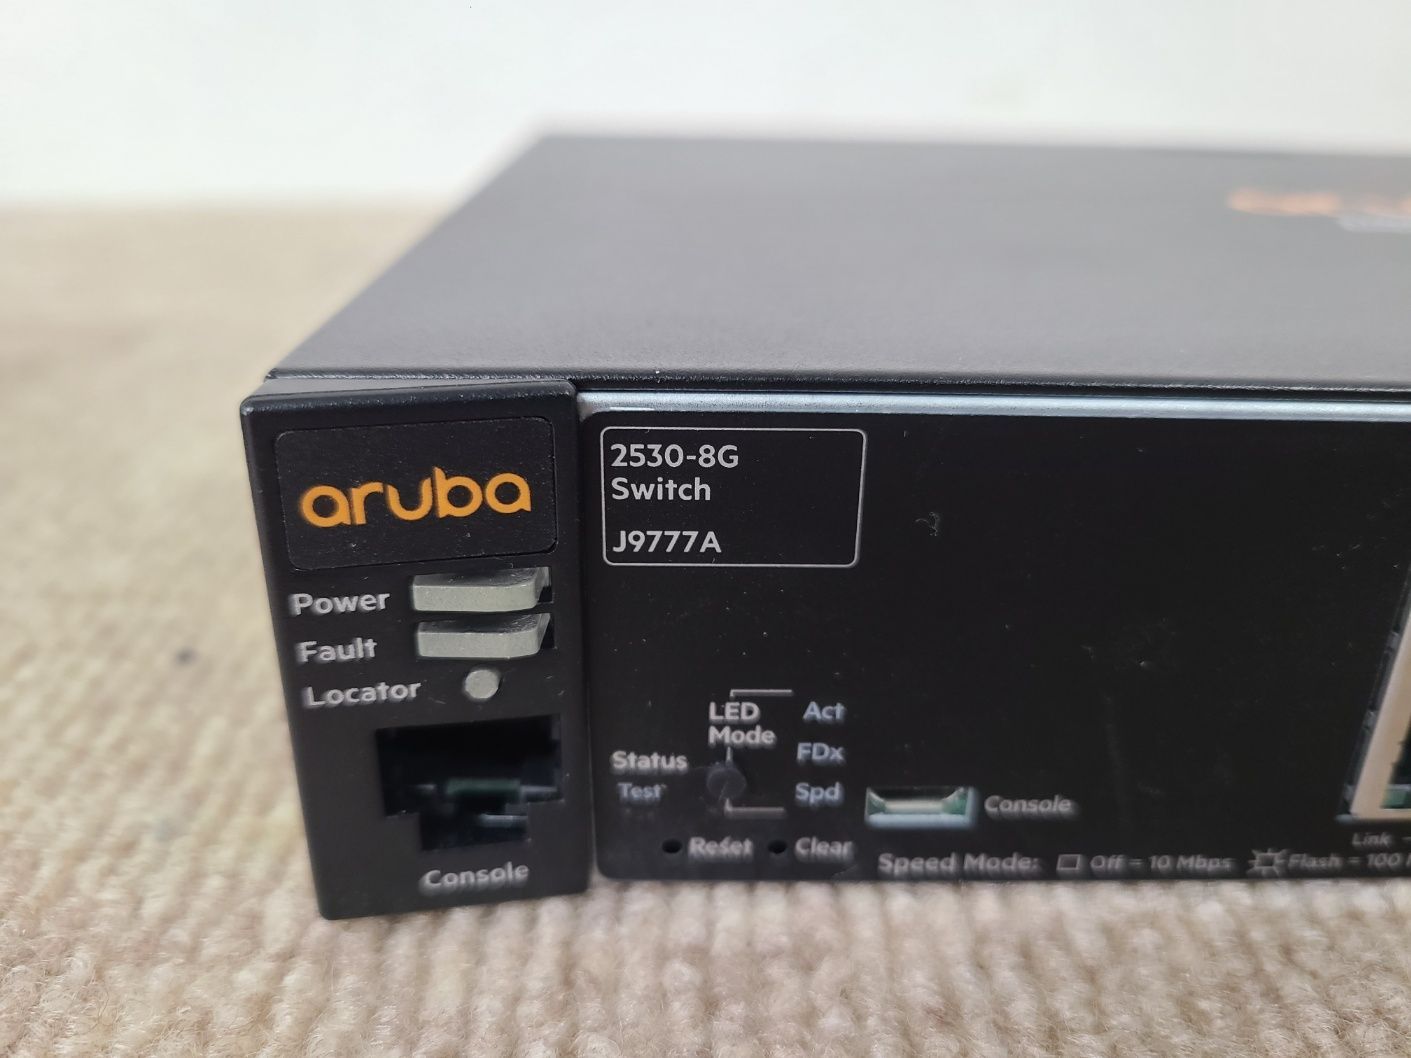 HPE Aruba J9777A 2530-8G 8-Port Switch Power /w Adapter 初期化済み [NW002]